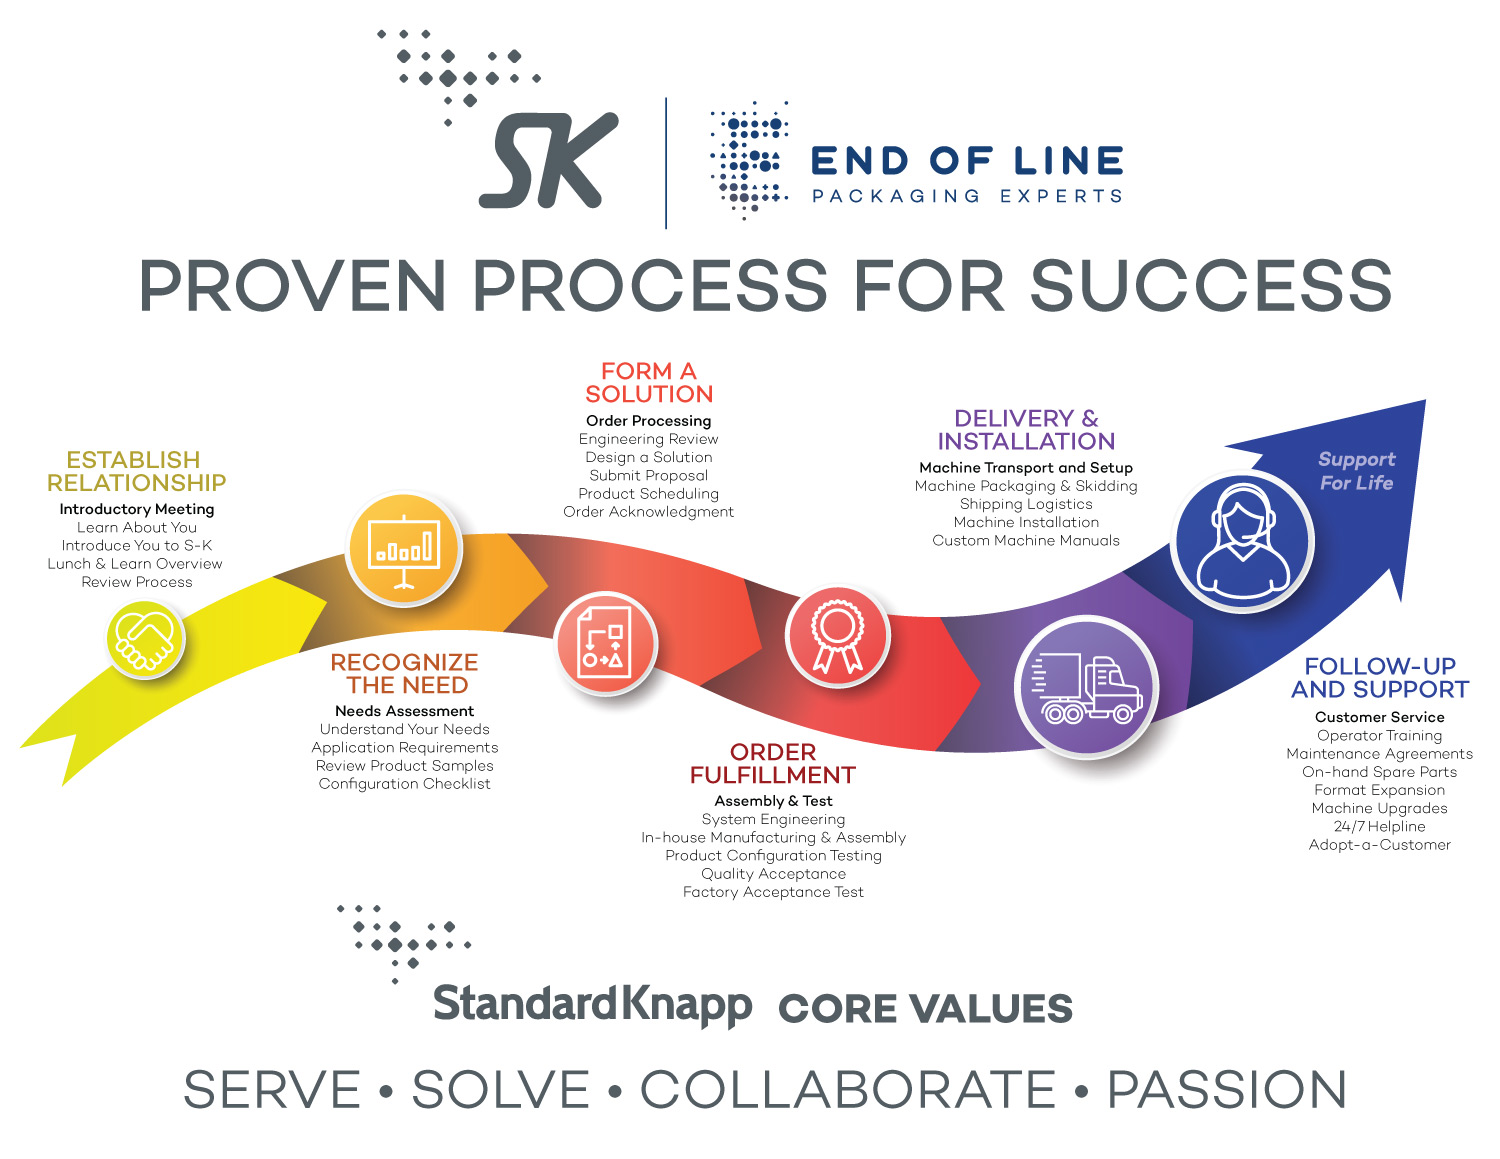 Our Proven Process for Success